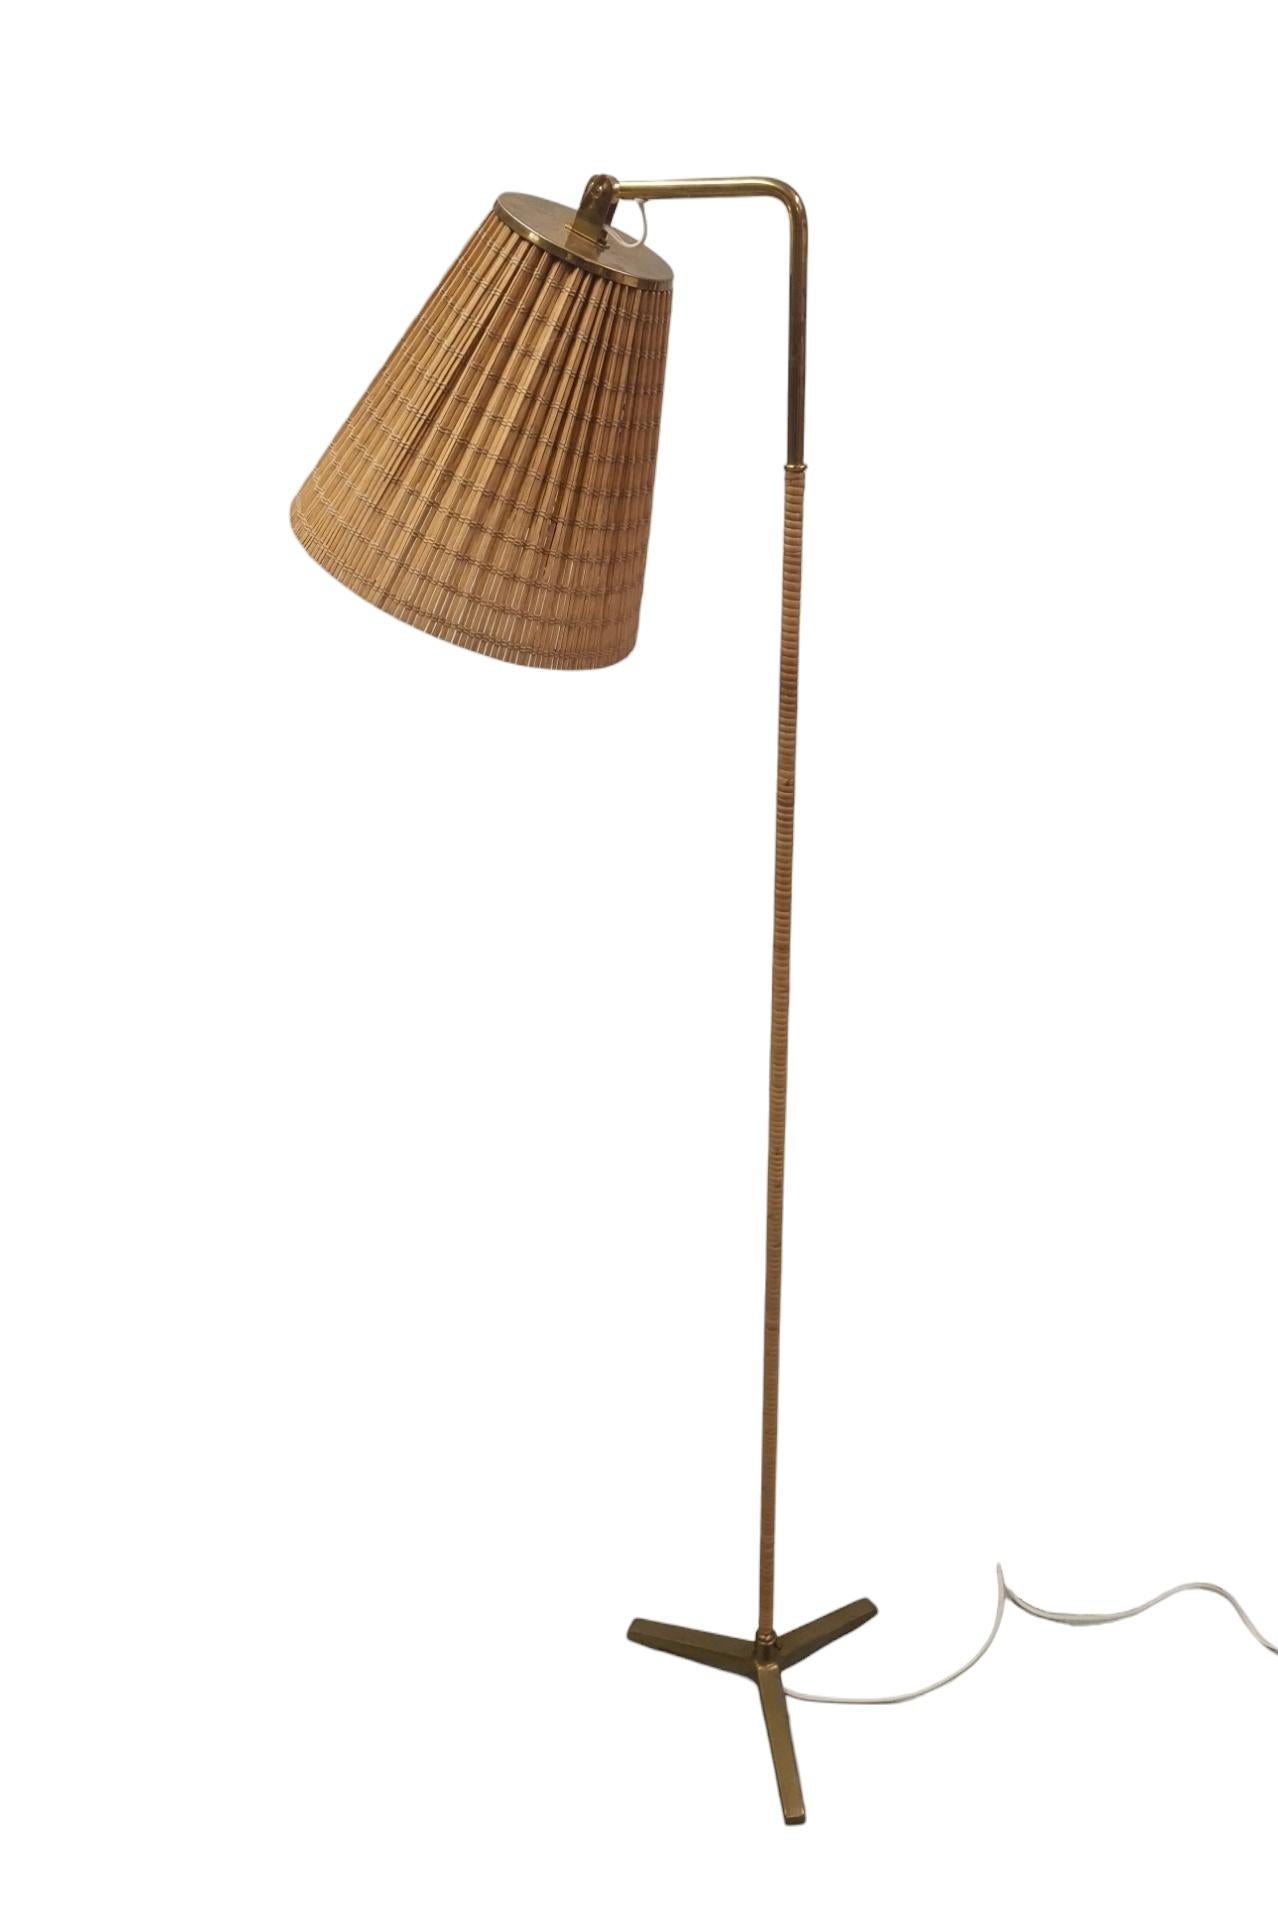 Paavo Tynell Floor Lamp Model 9631, Taito Oy For Sale 1